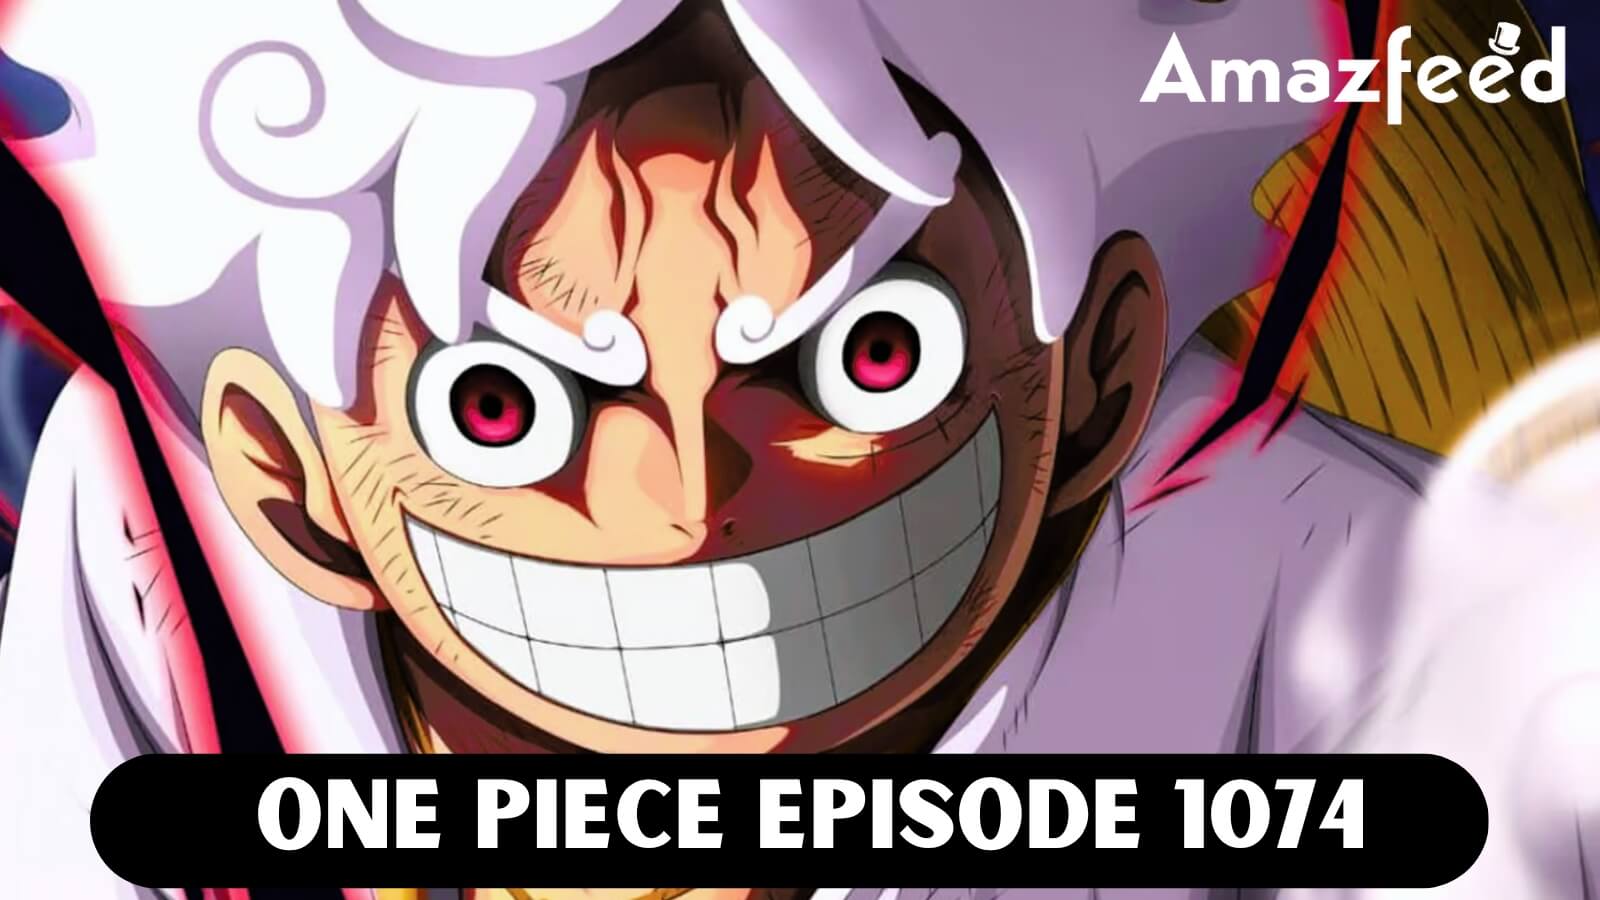 How To Watch One Piece Episode 1074 In HD/4K Quality!!! - Latest Updates 